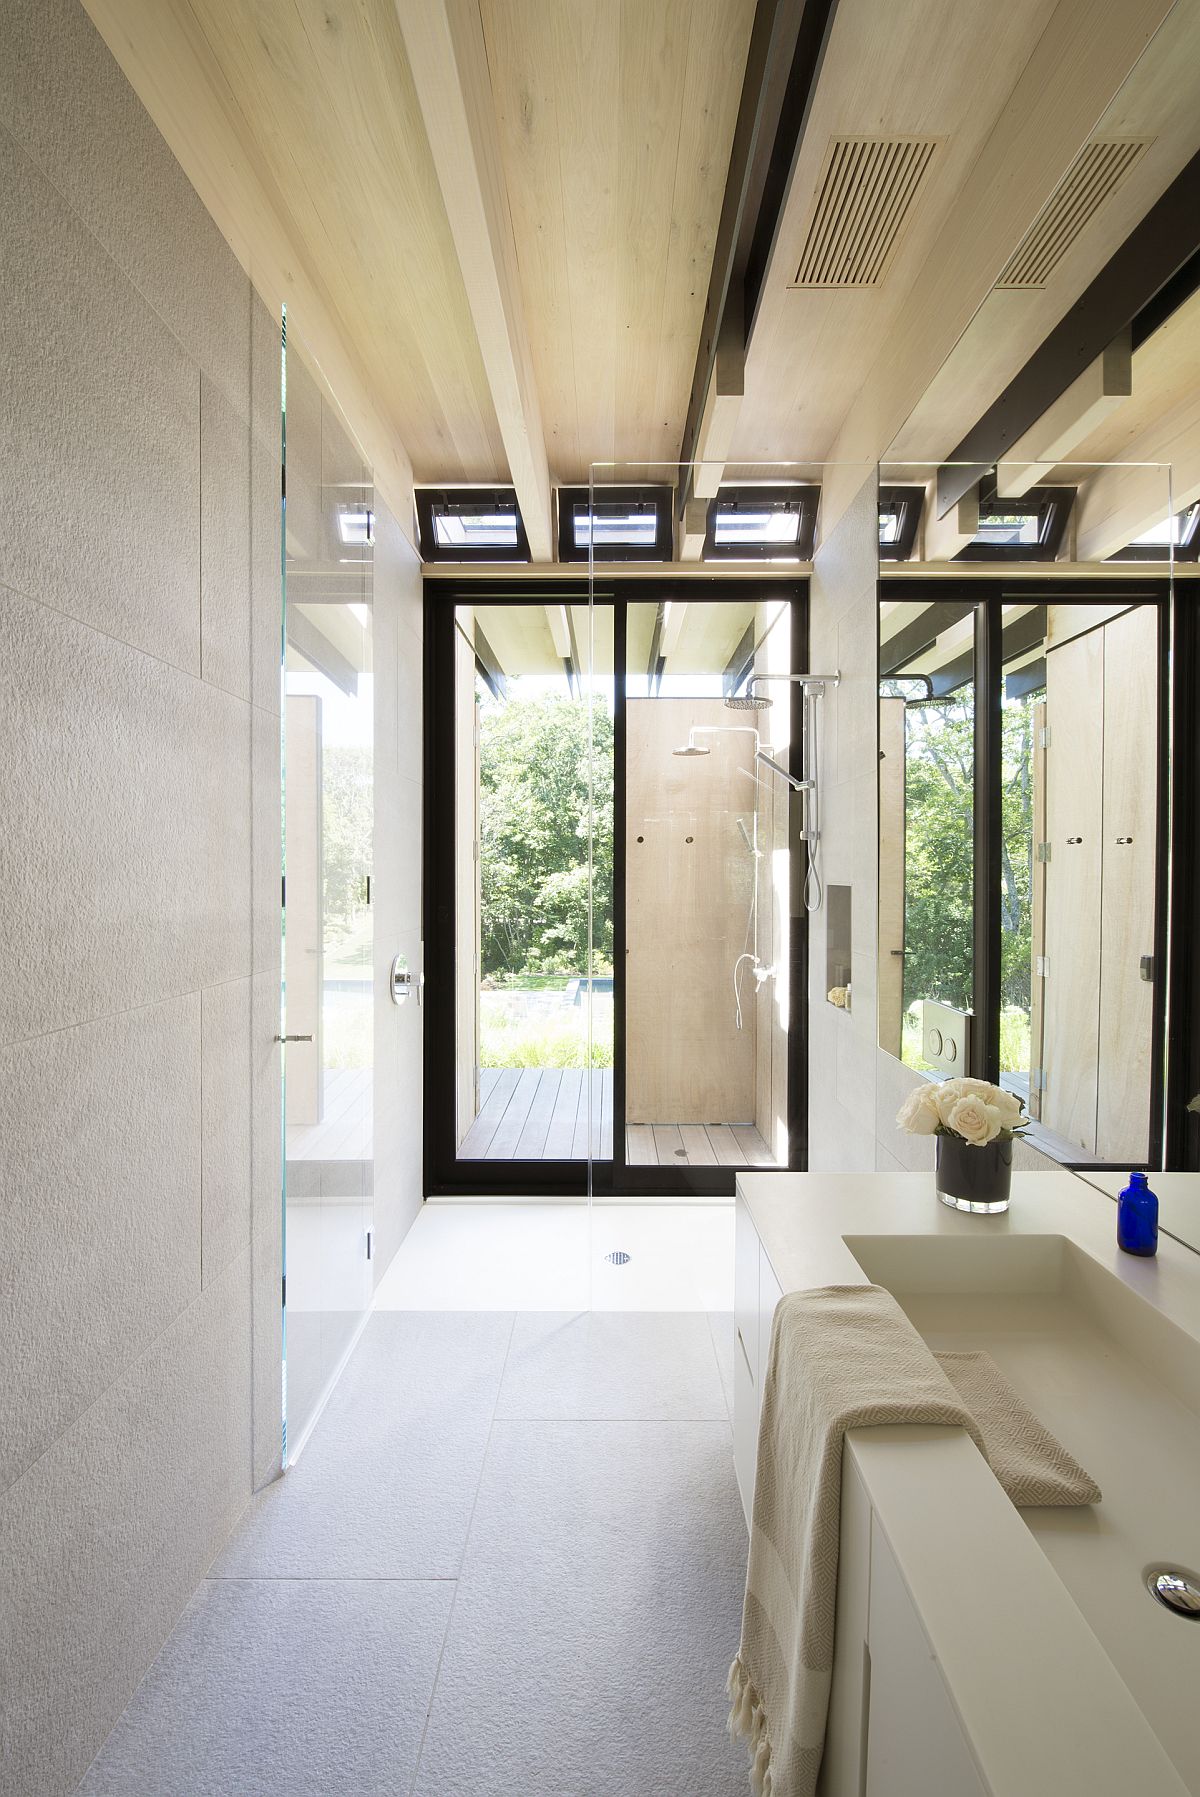 Contemporary bathroom in white with large windows and black window frames